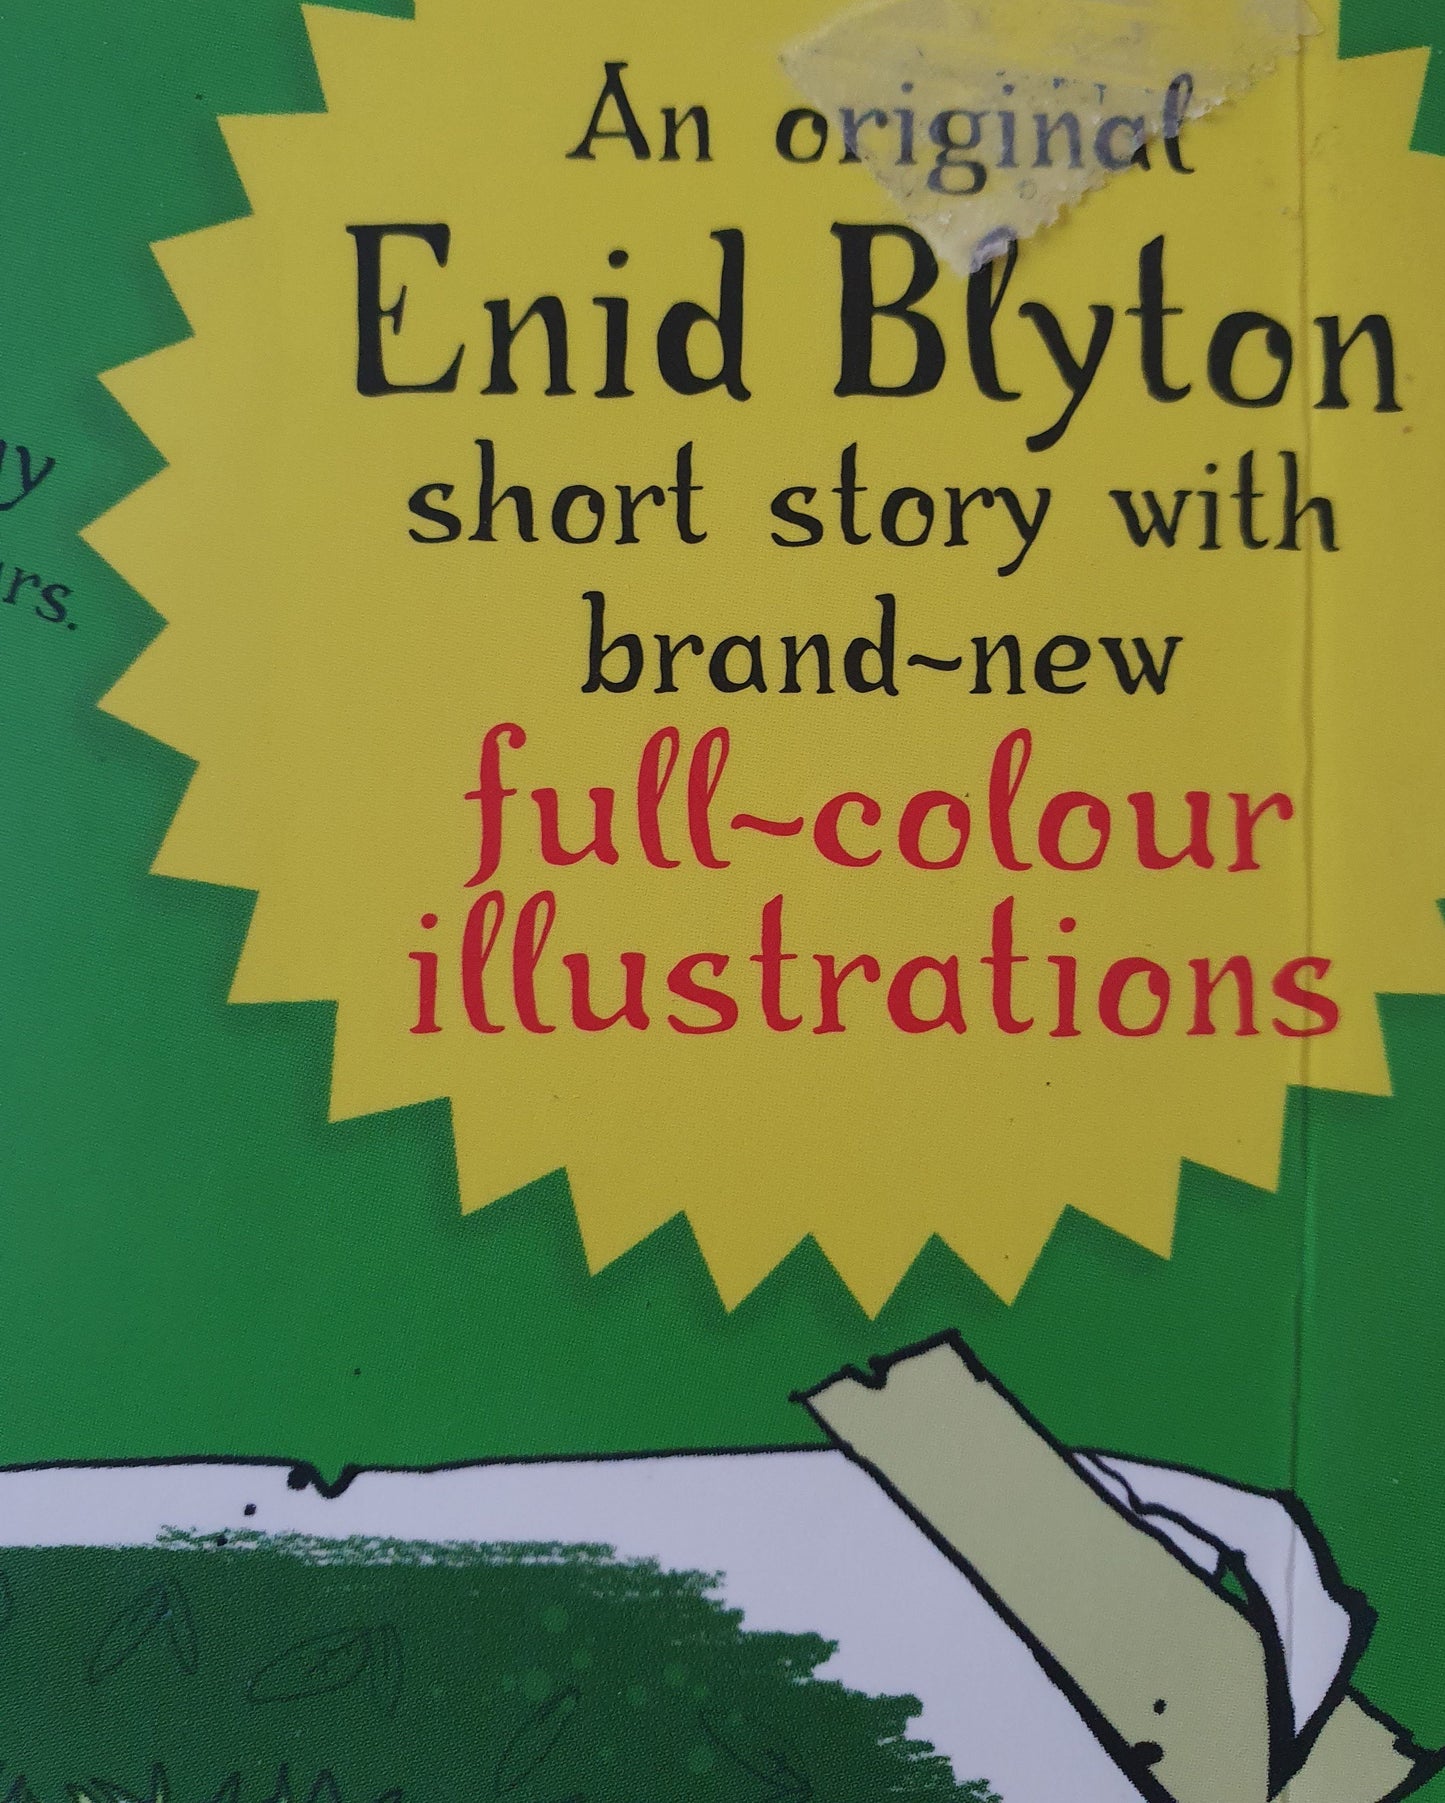 A Lazy Afternoon Like New, 6+ years Enid Blyton  (6619441955001)